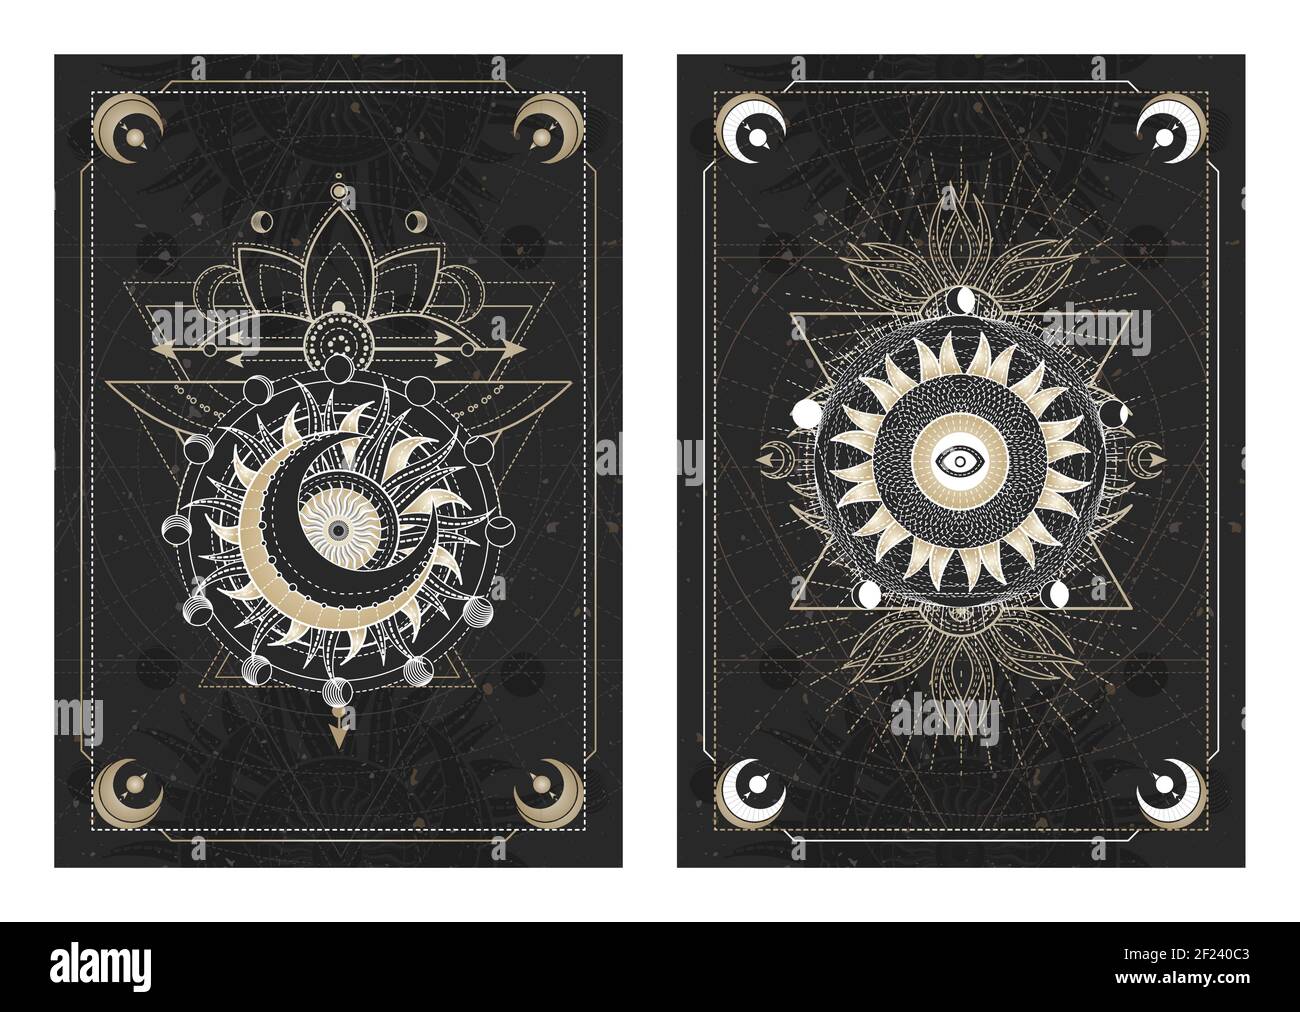 Vector dark illustrations with sacred geometry symbols, grunge textures and frames. Images in black, white and gold. Stock Vector